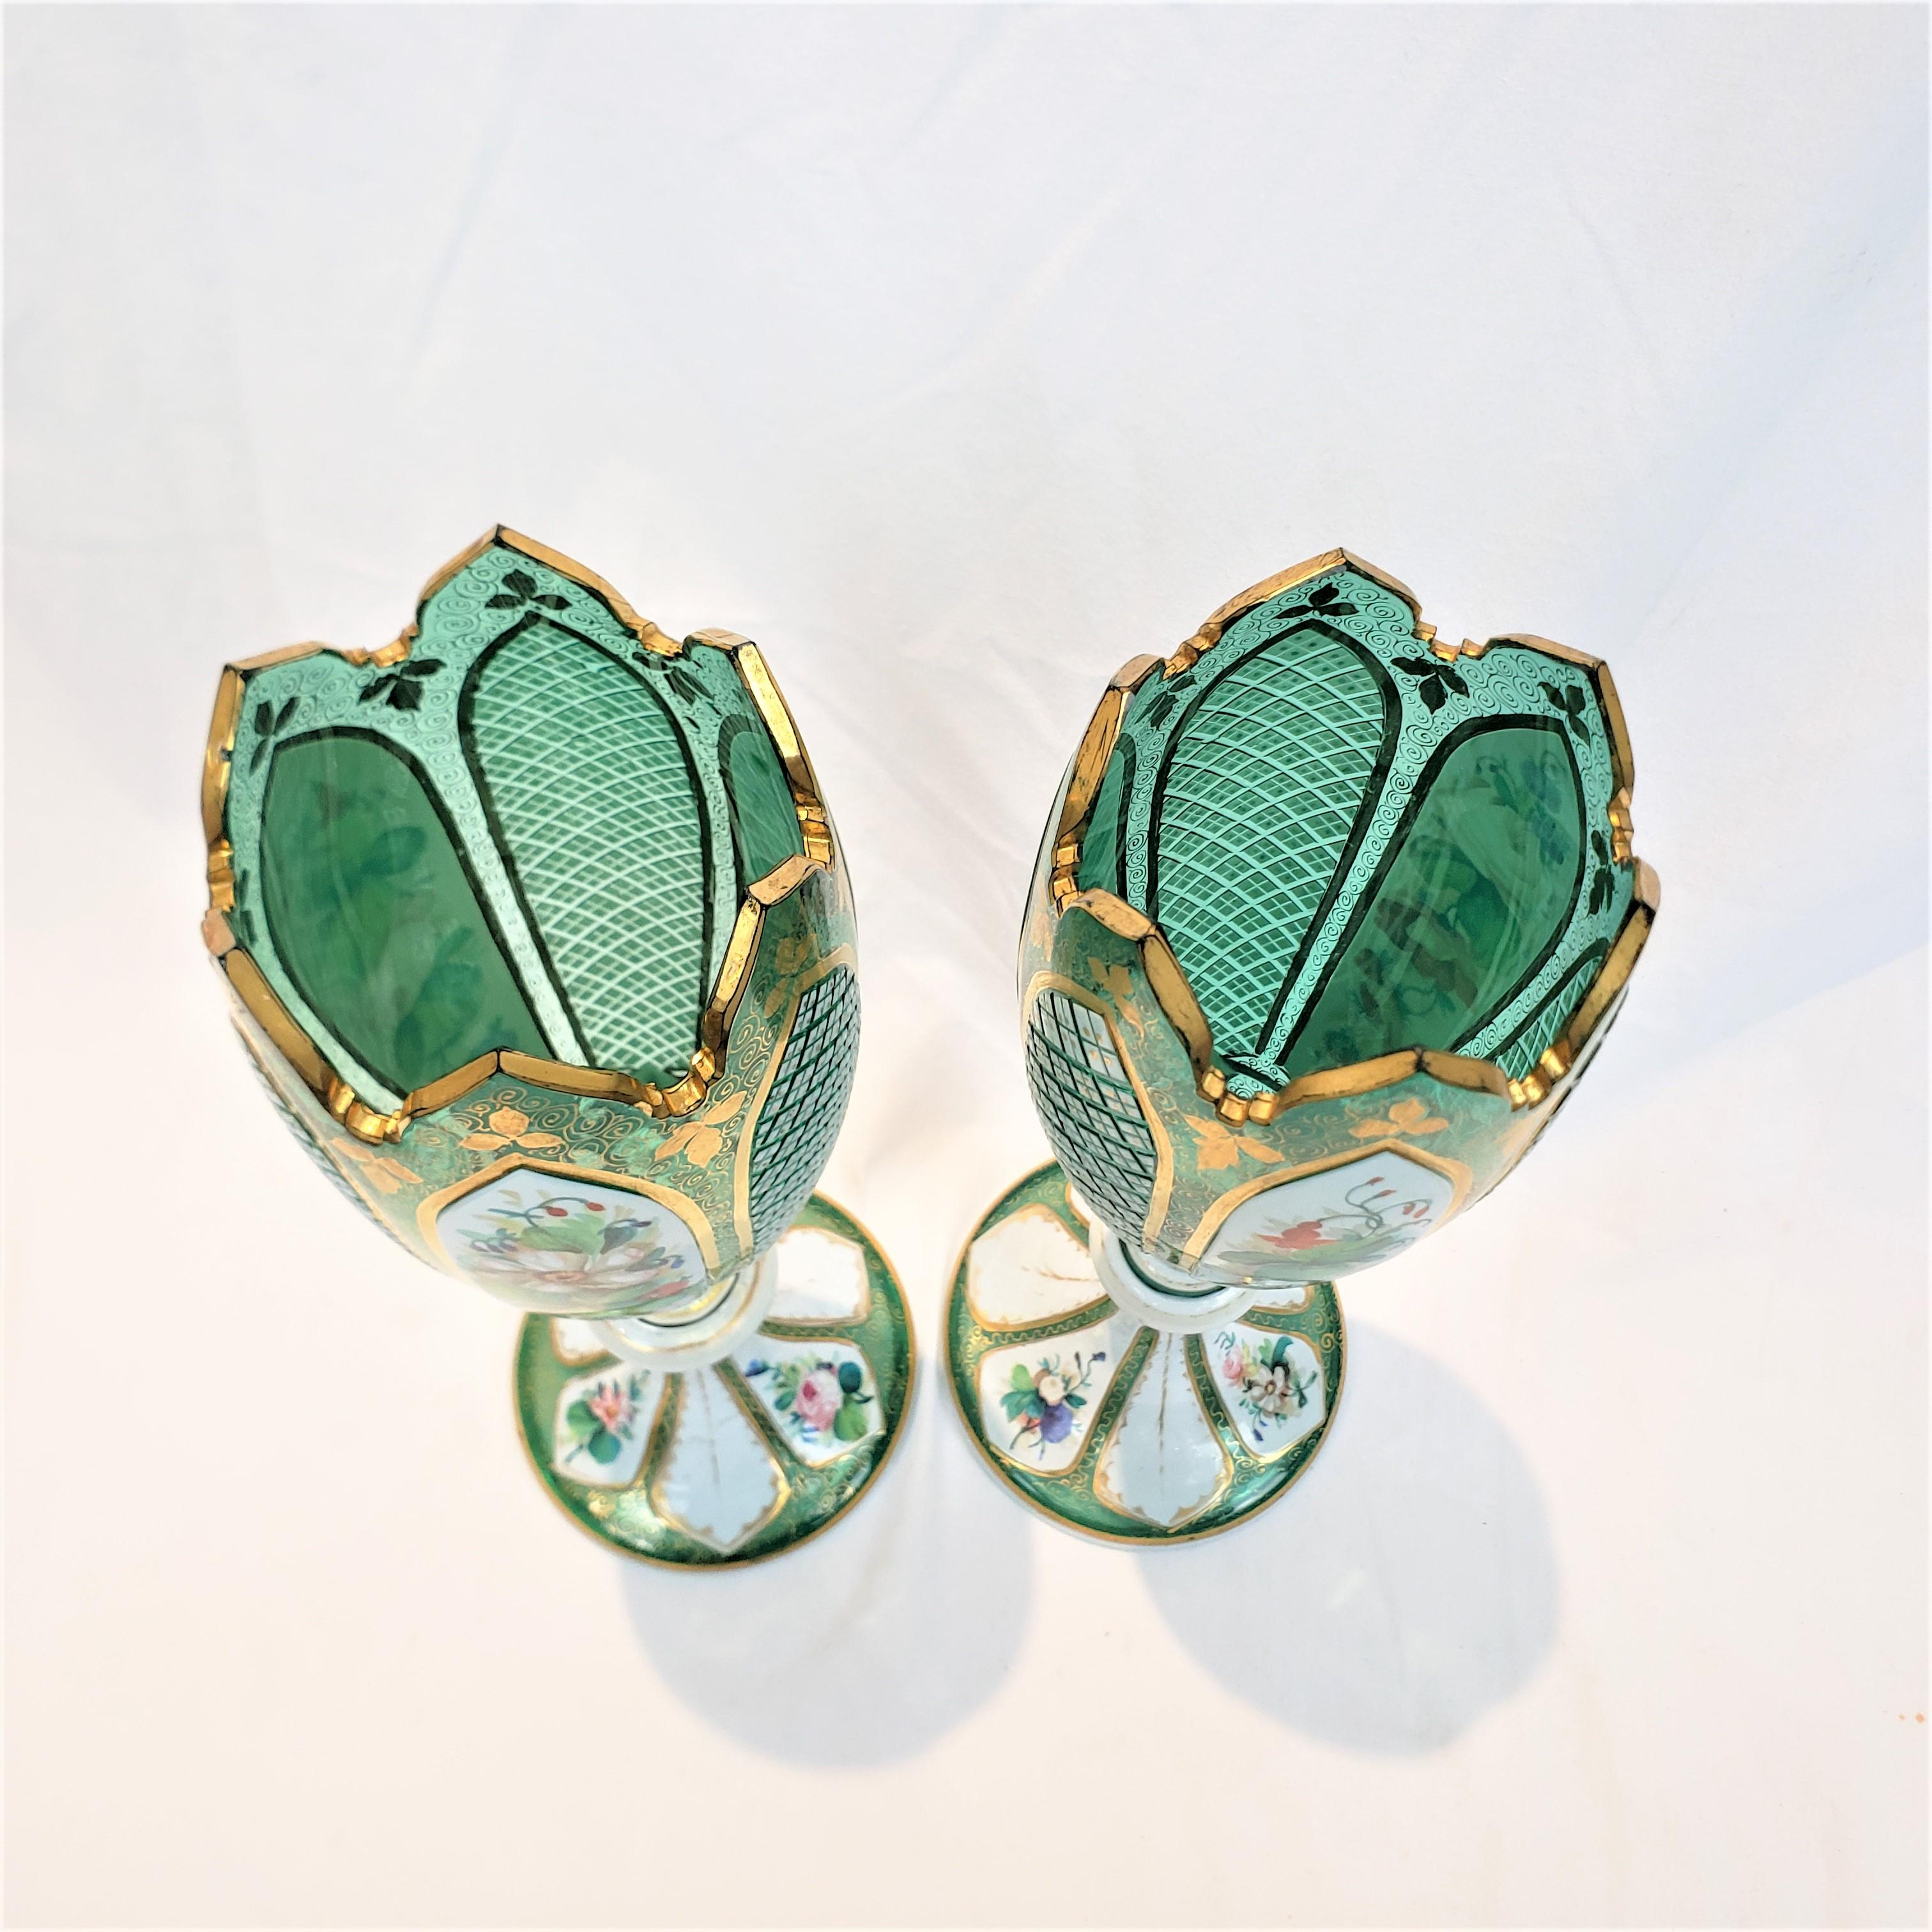 19th Century Pair of Antique Moser Style Green Glass Vases with Enamelled Panels & Gilt Decor